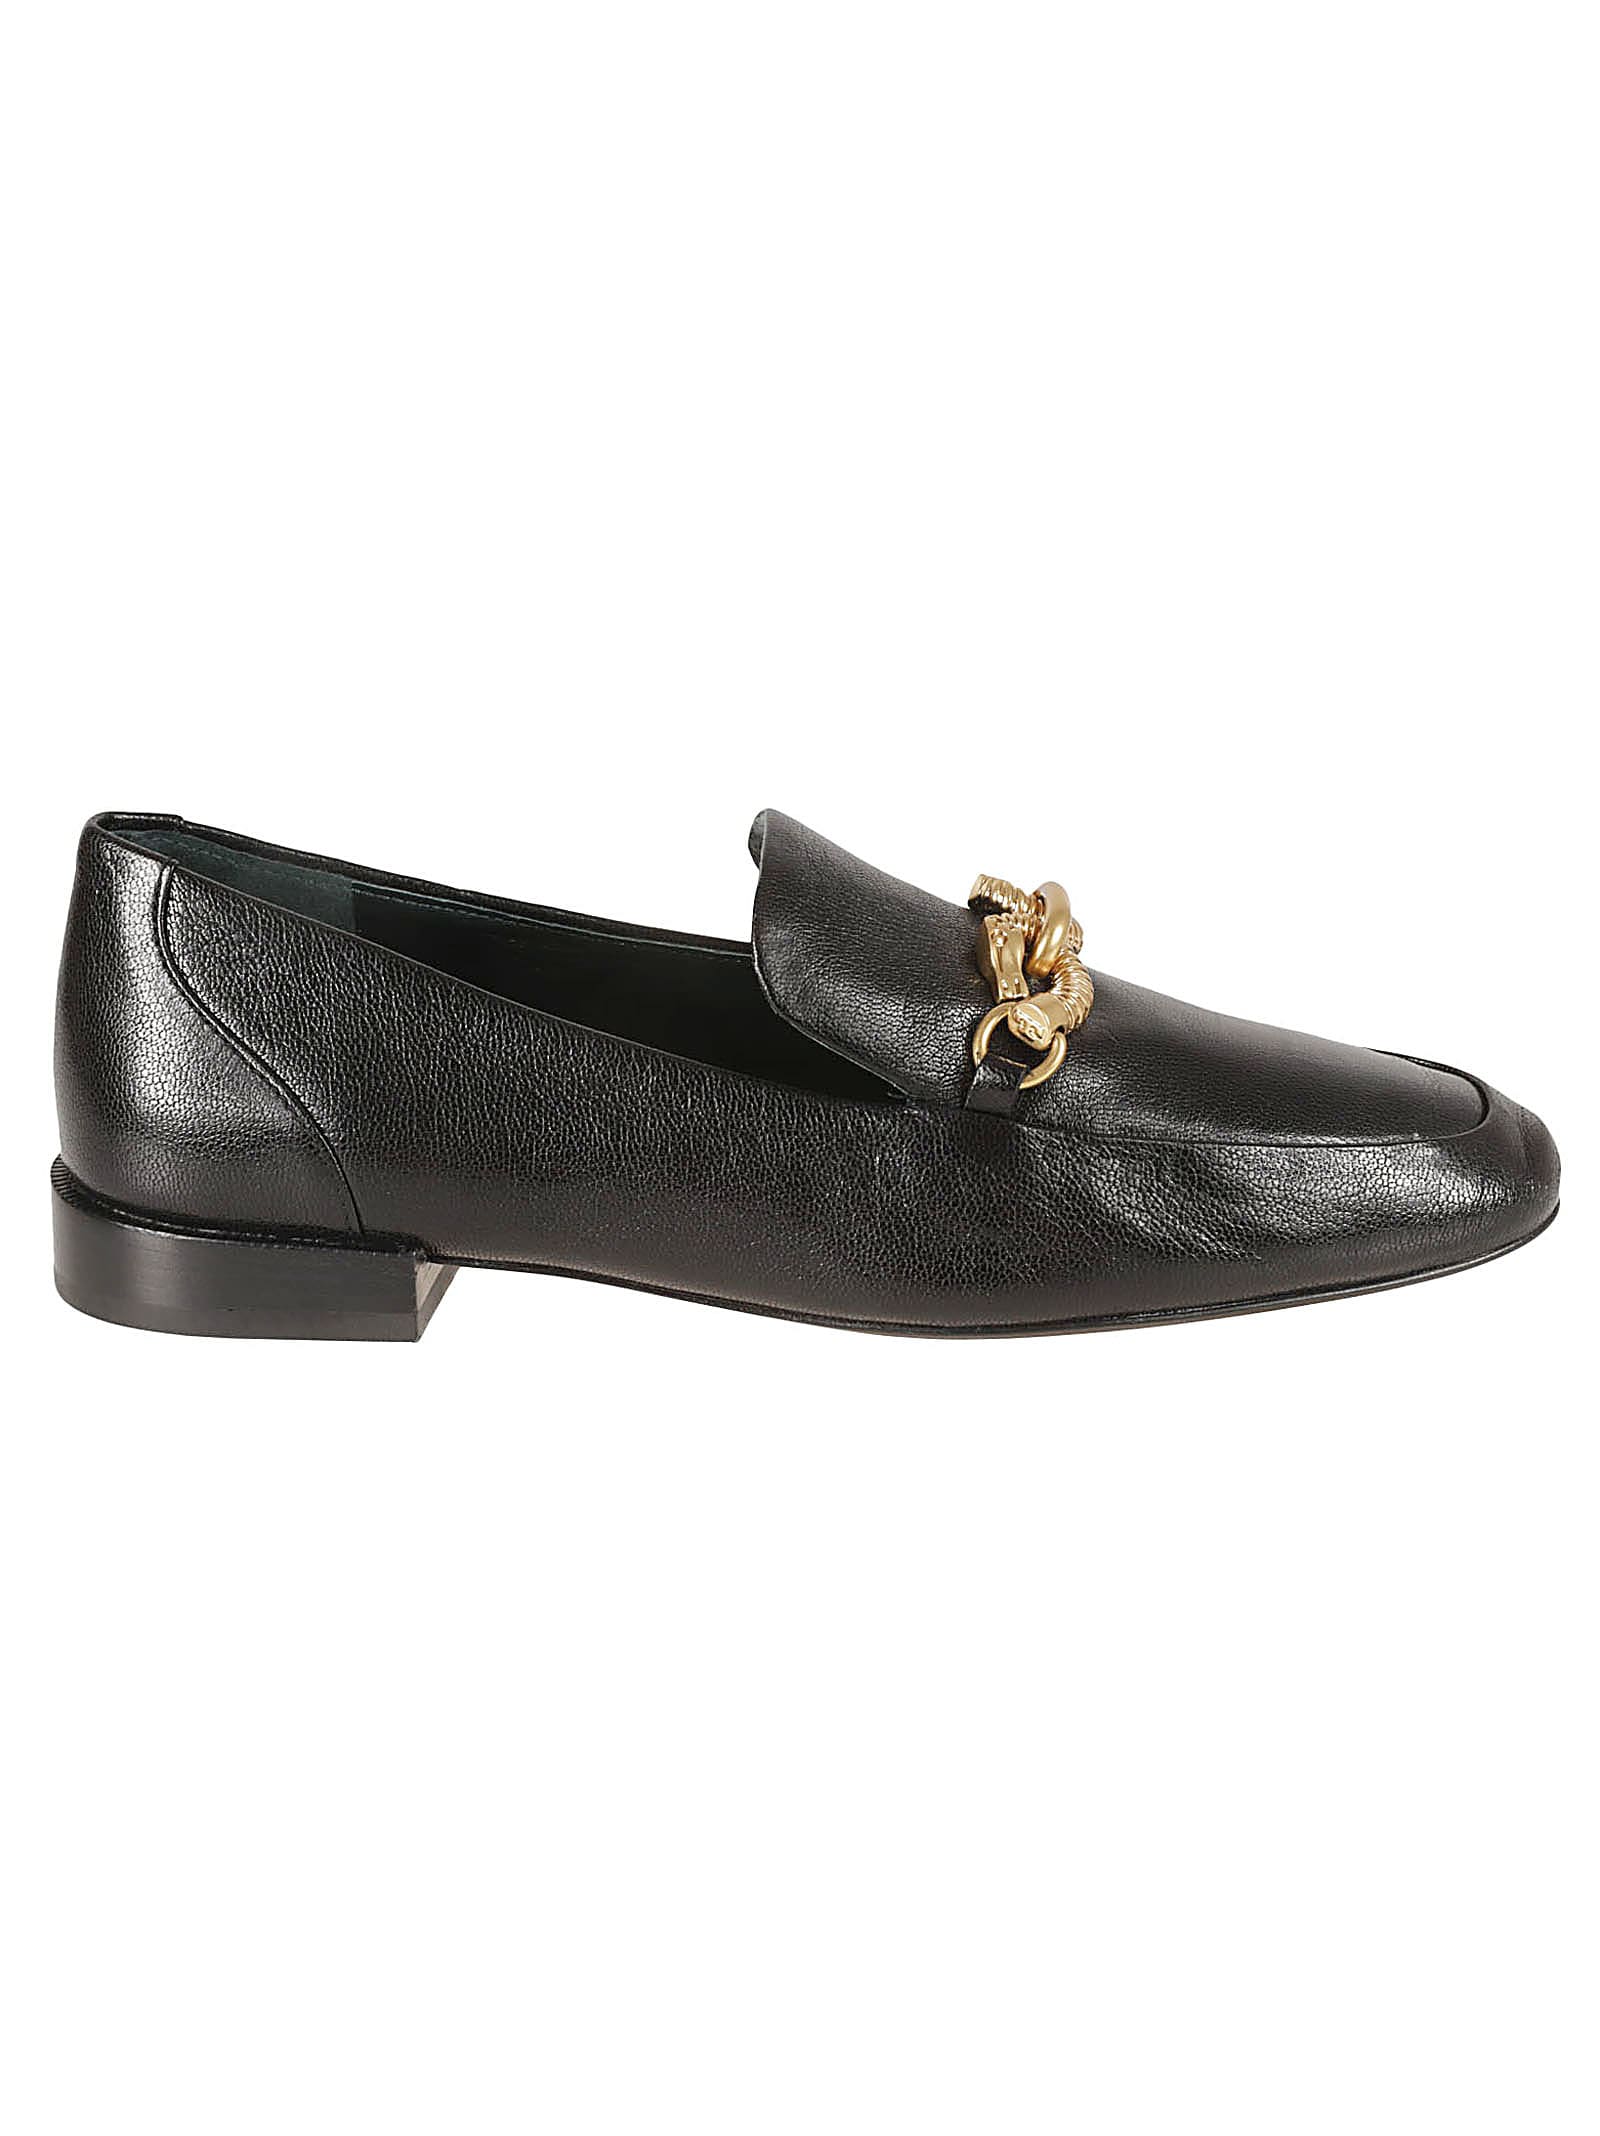 Shop Tory Burch Jessa Loafers In Perfect Black/gold